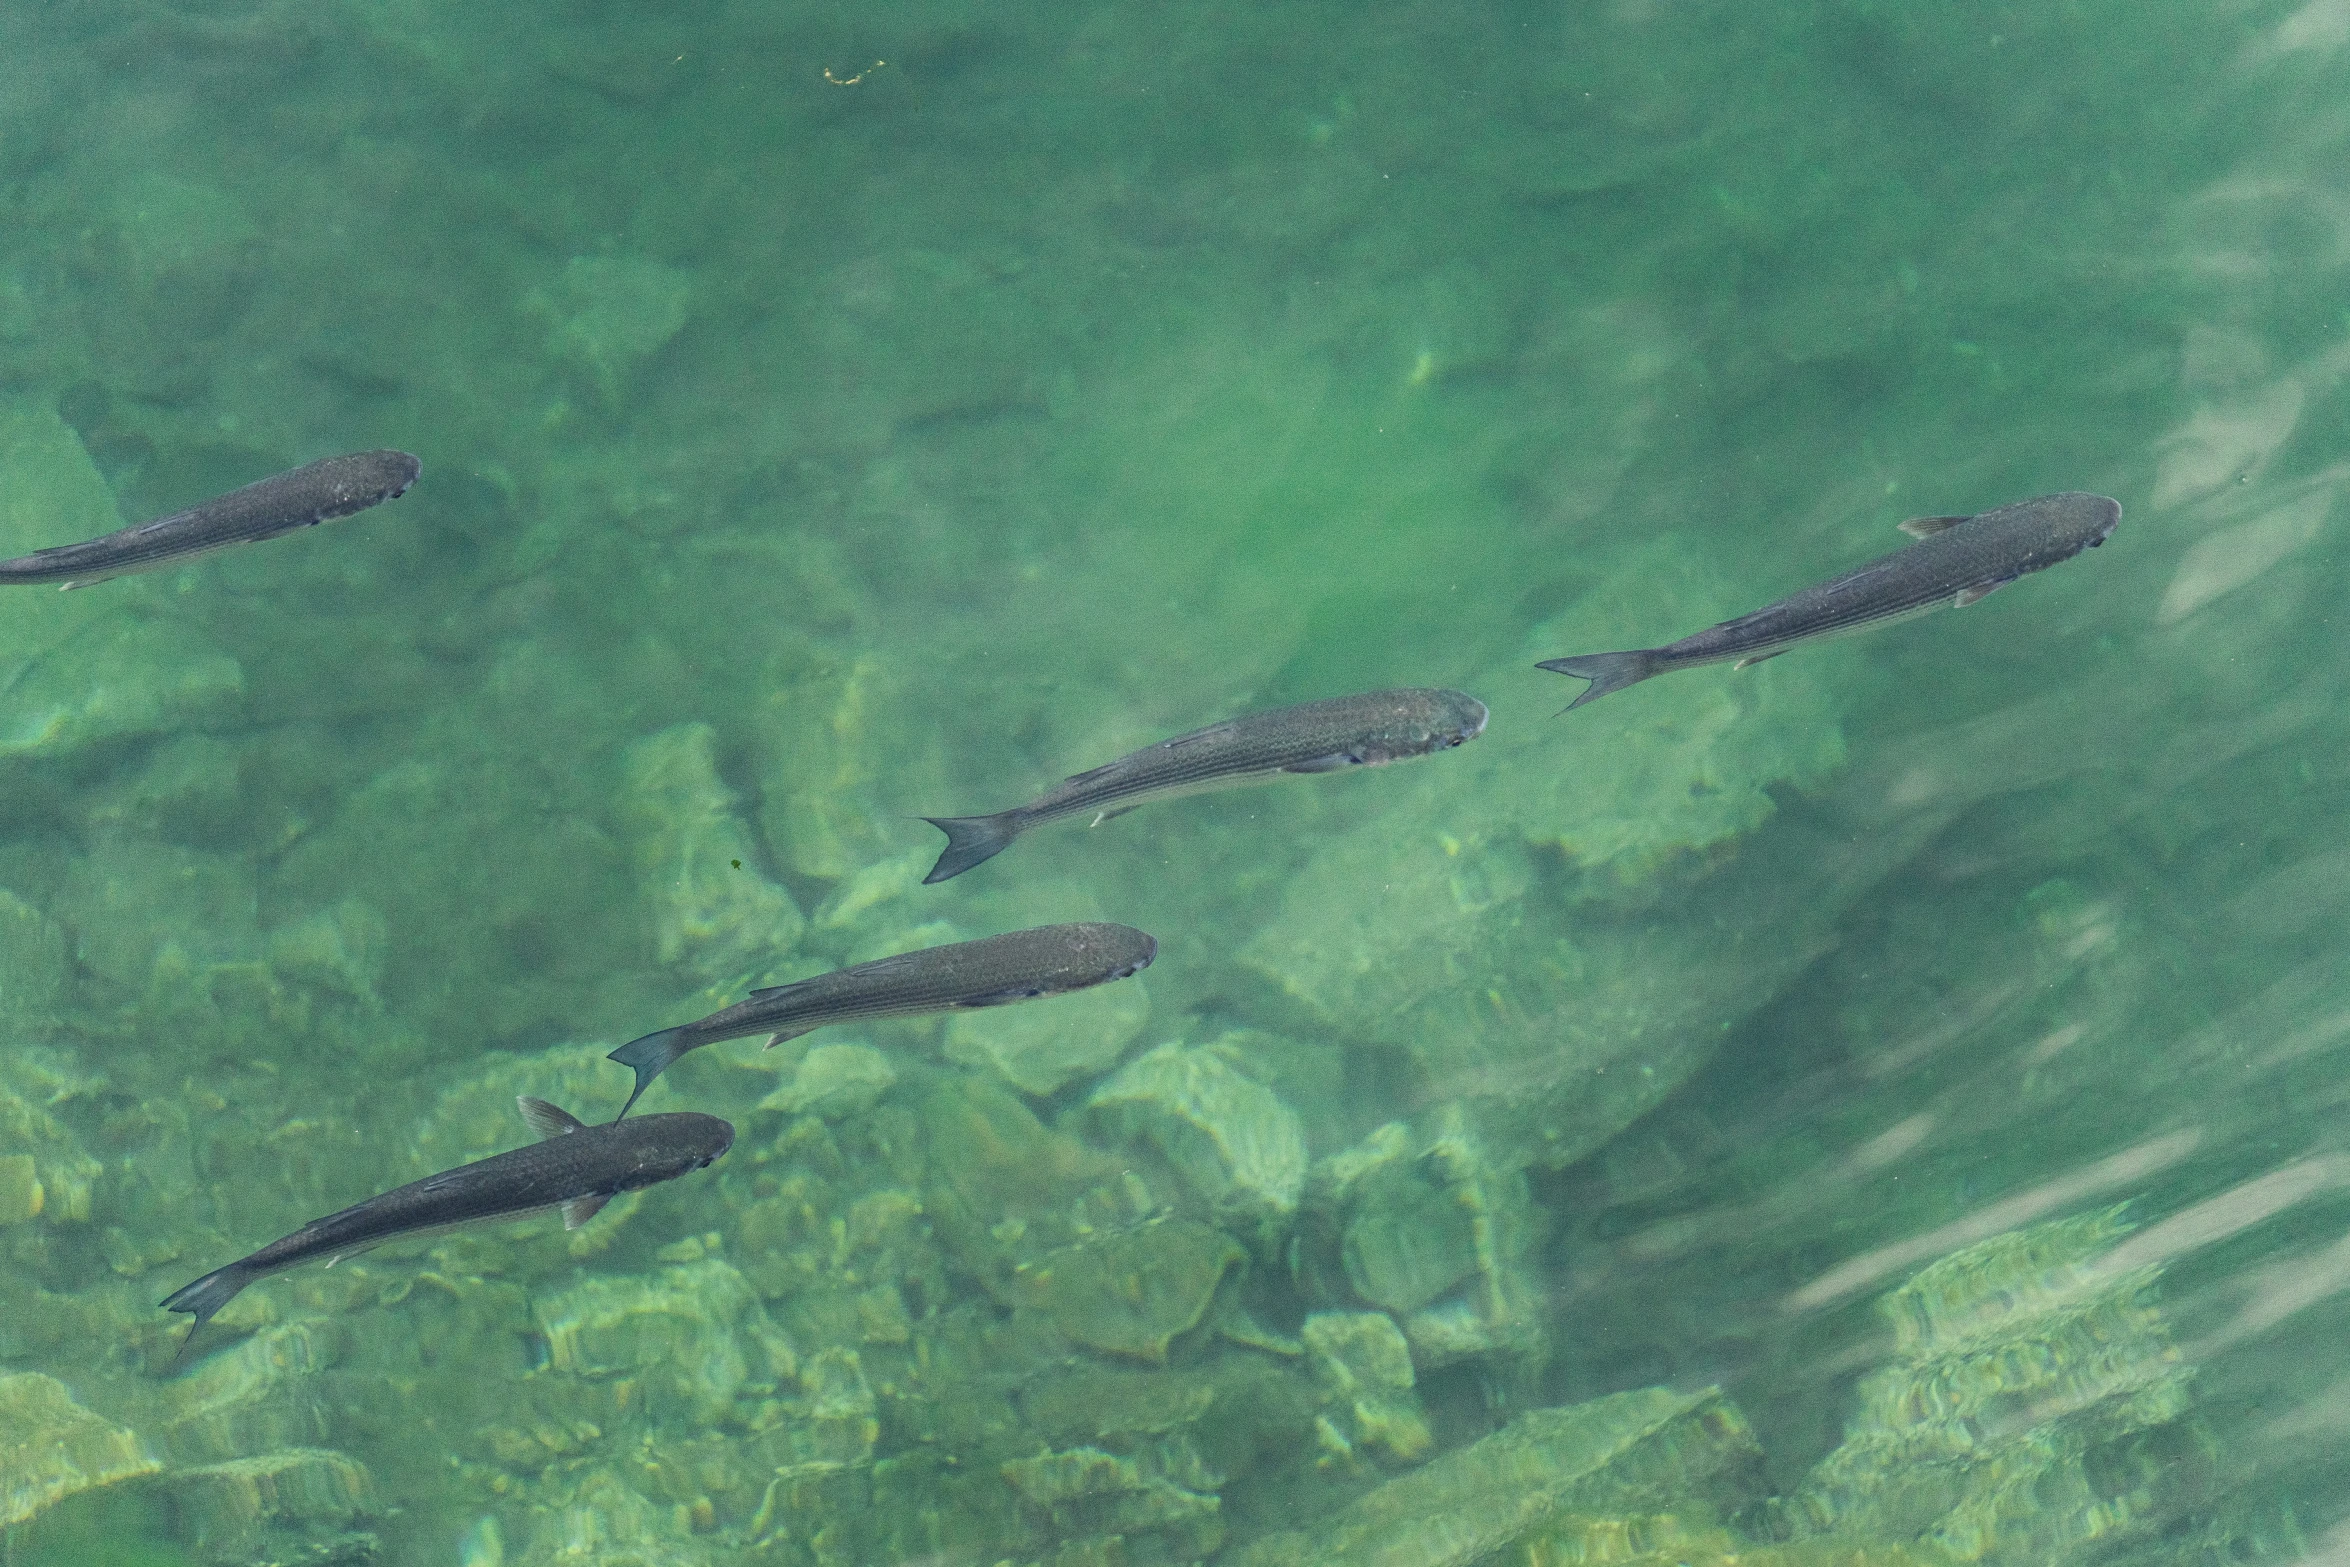 several large fish in shallow water at the edge of a river